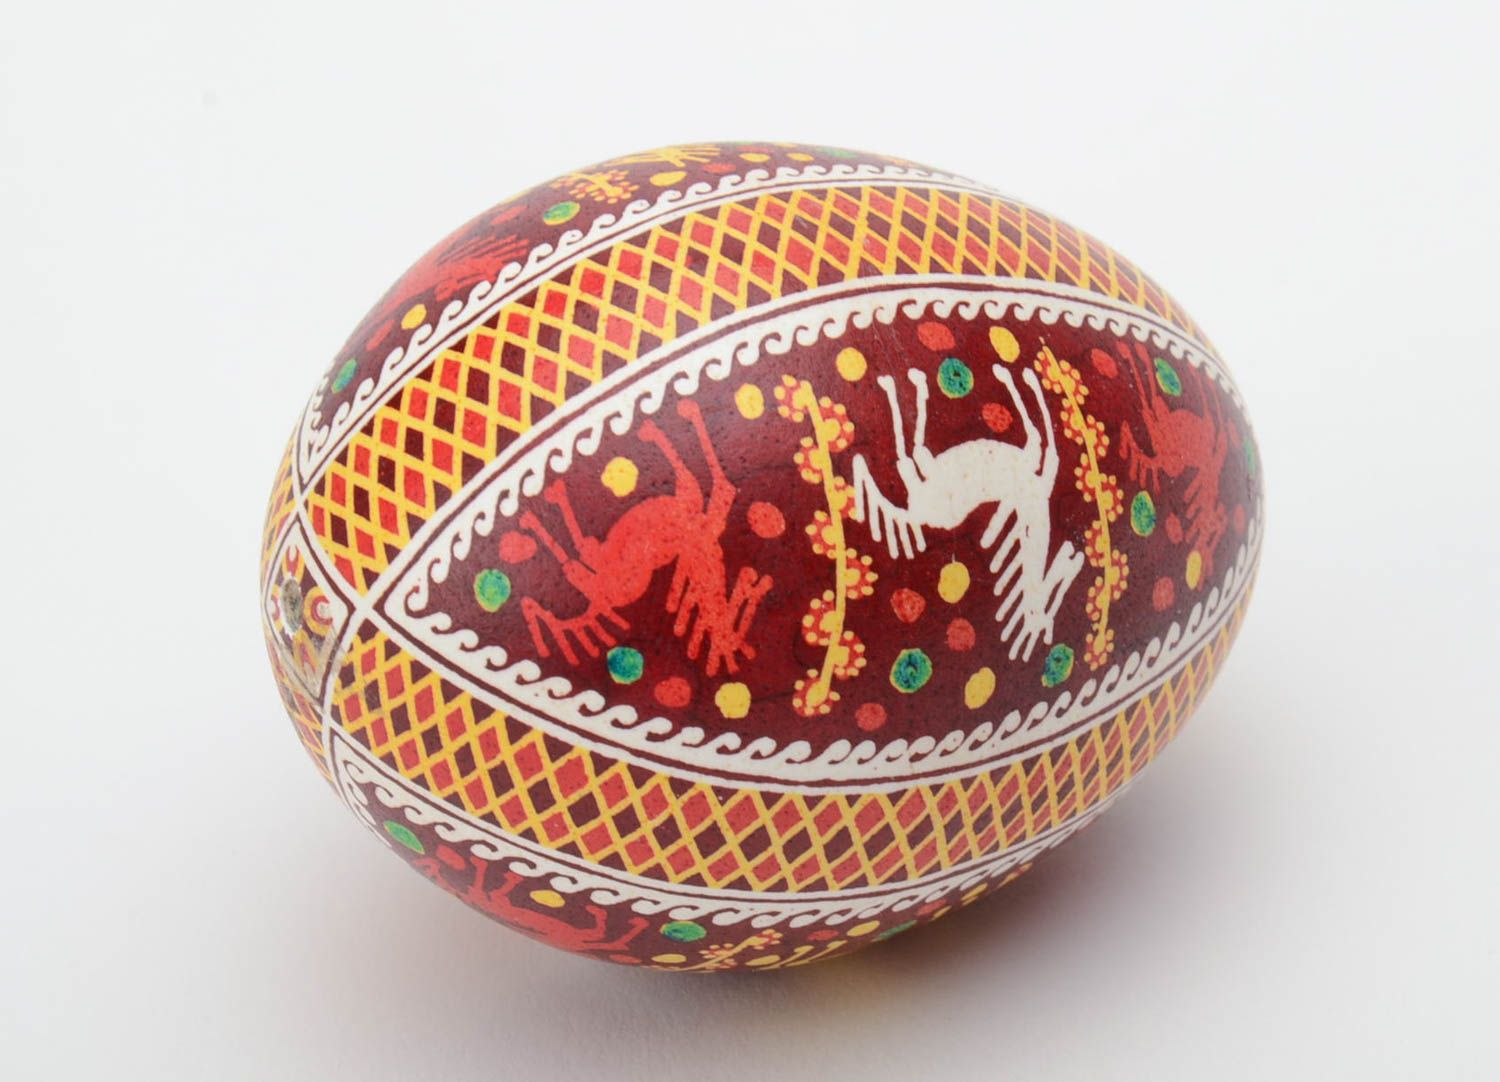 Homemade designer painted Easter egg with horse pattern created using waxing technique photo 4